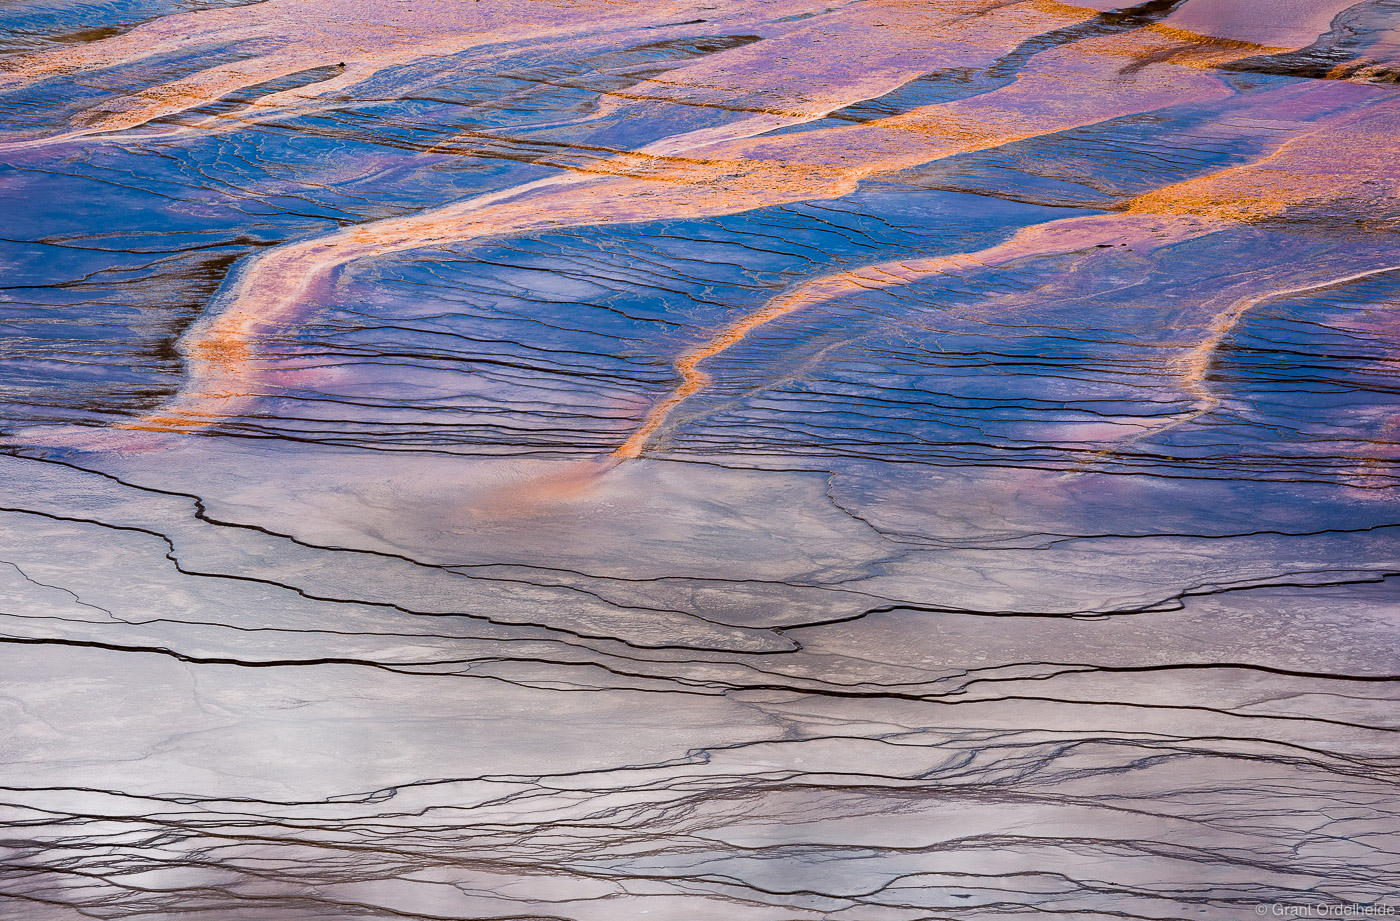 Abstract patterns in the Grand Prismatic Spring.